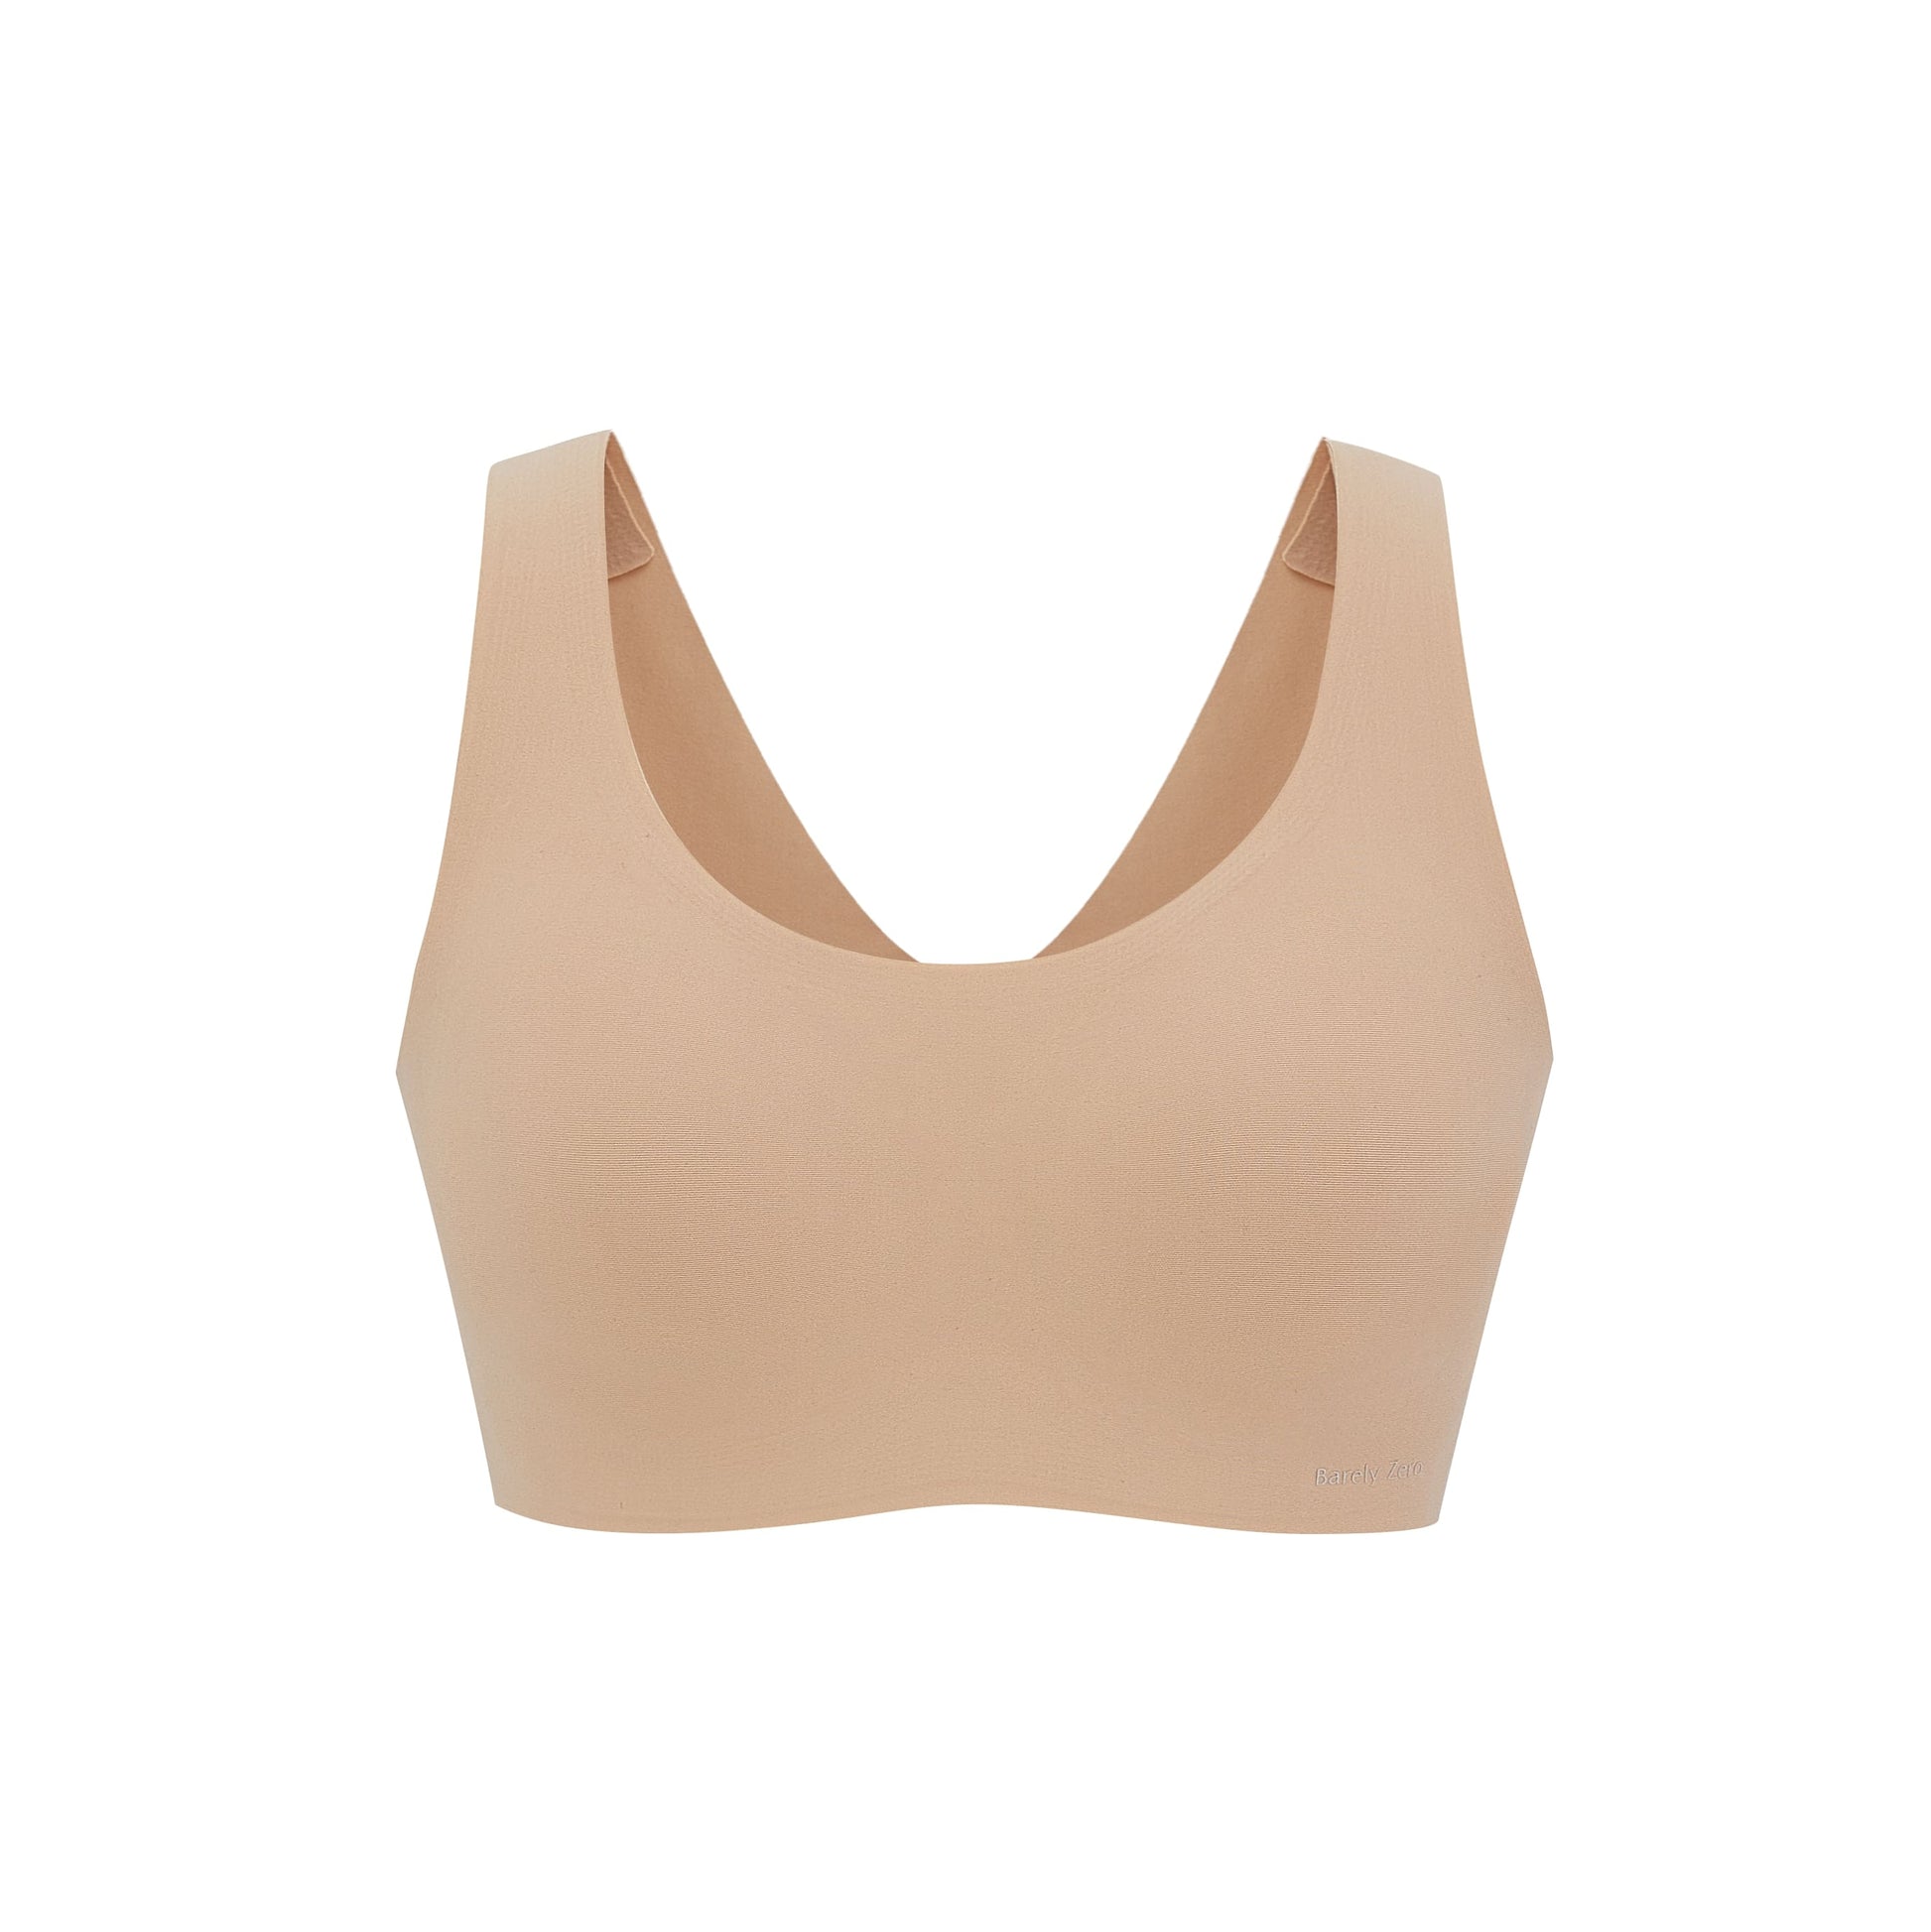 Fashion Tex Women Bralette Lightly Padded Bra - Buy Fashion Tex Women  Bralette Lightly Padded Bra Online at Best Prices in India